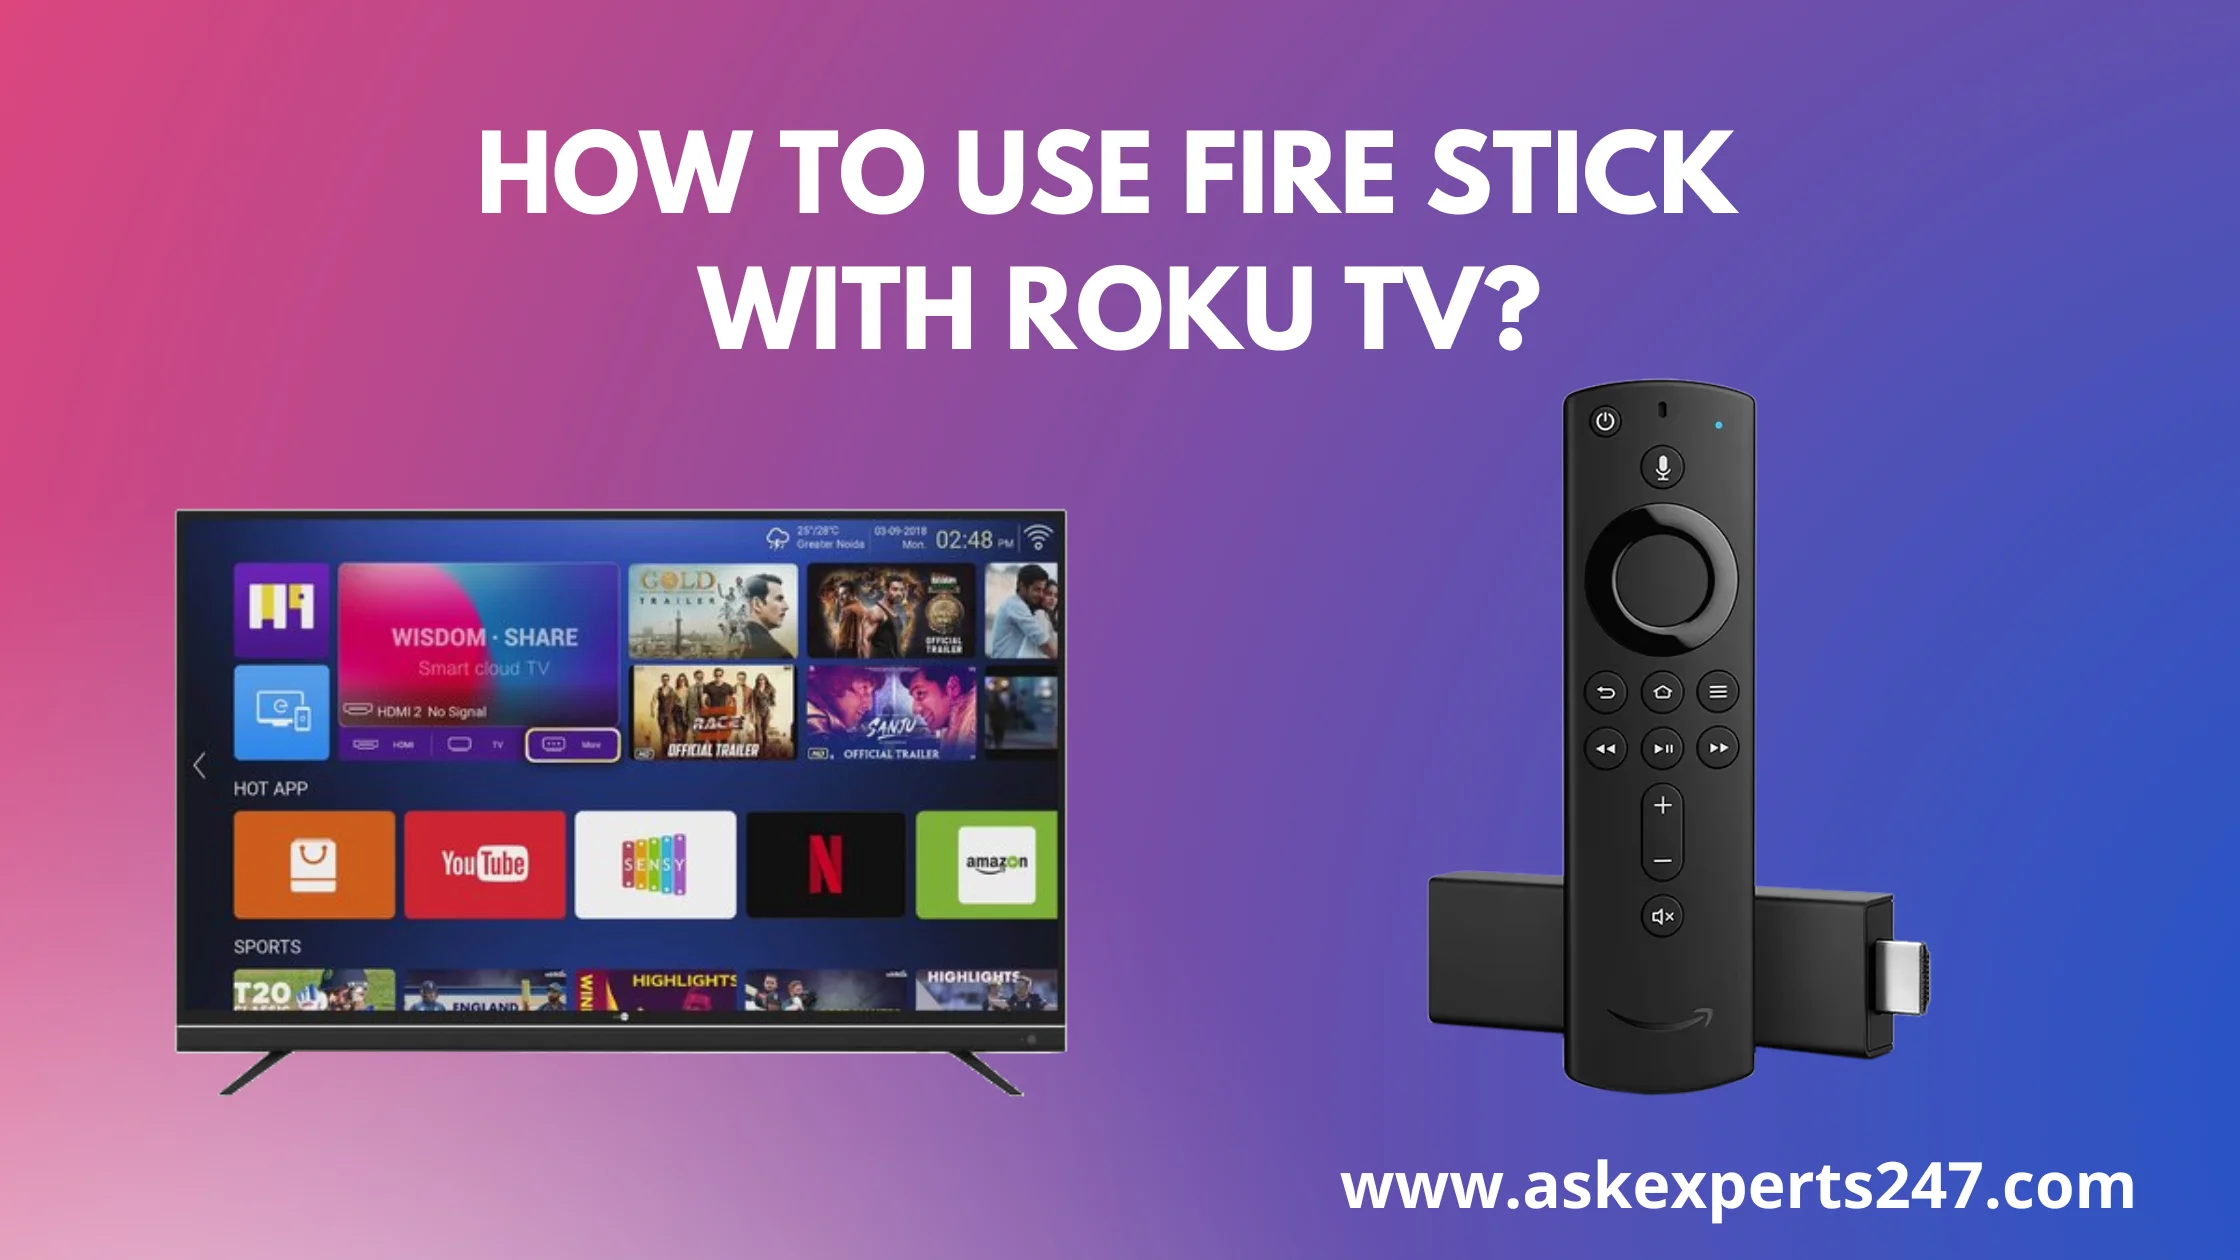 How to Use a Firestick With Roku TV?